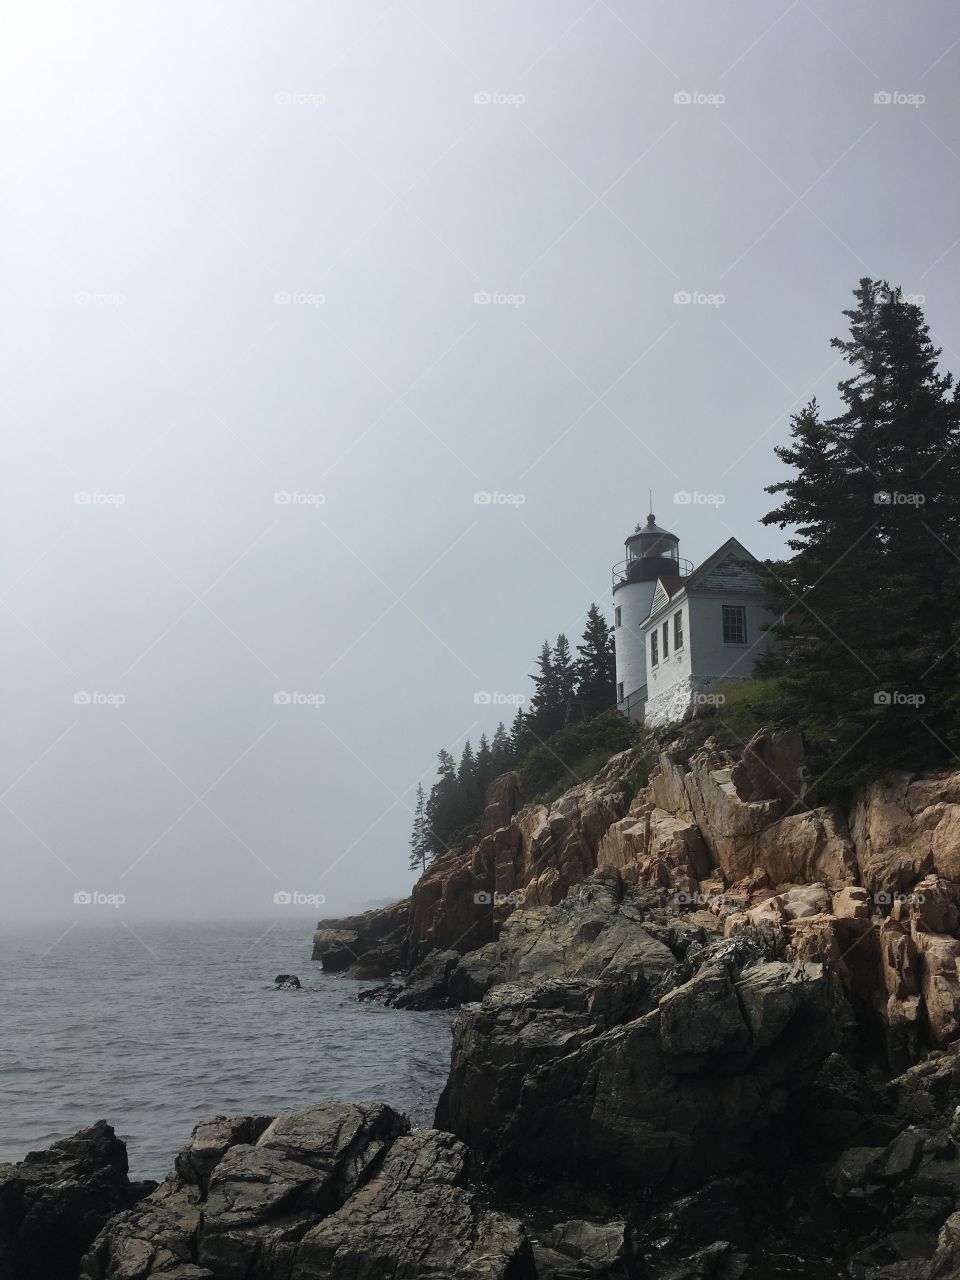 Lighthouse view in Acadia, Maine. It was a foggy morning, but it was absolutely beautiful! And there was a little breeze as well.